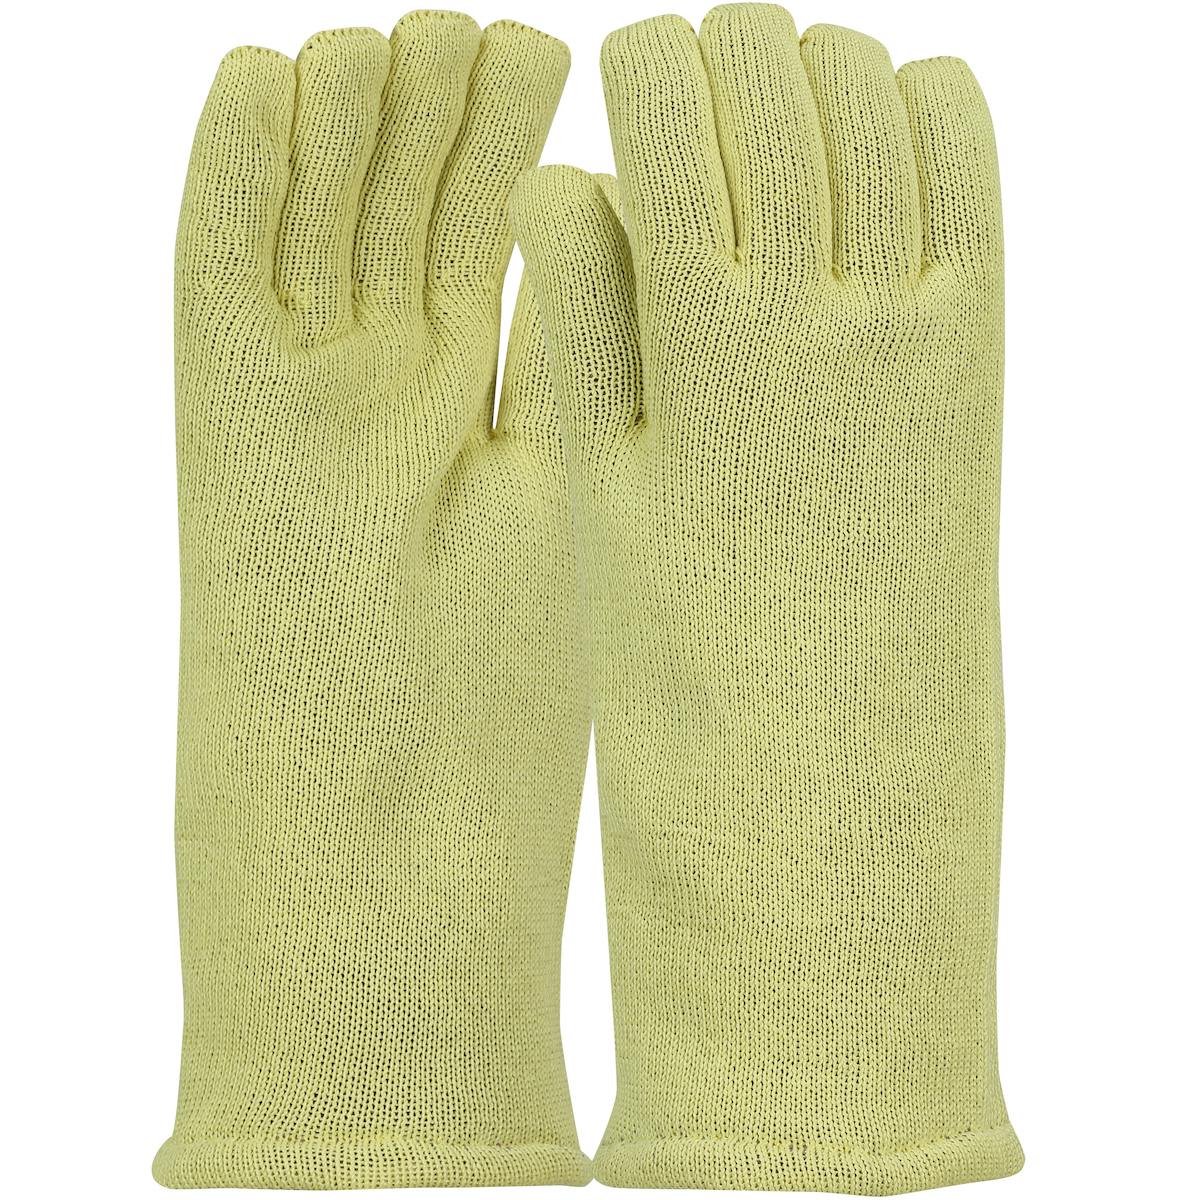 QRP® Qualatherm® Heat & Cold Resistant Glove with Twaron® Outer Shell and Nylon Lining - 14" (59G)